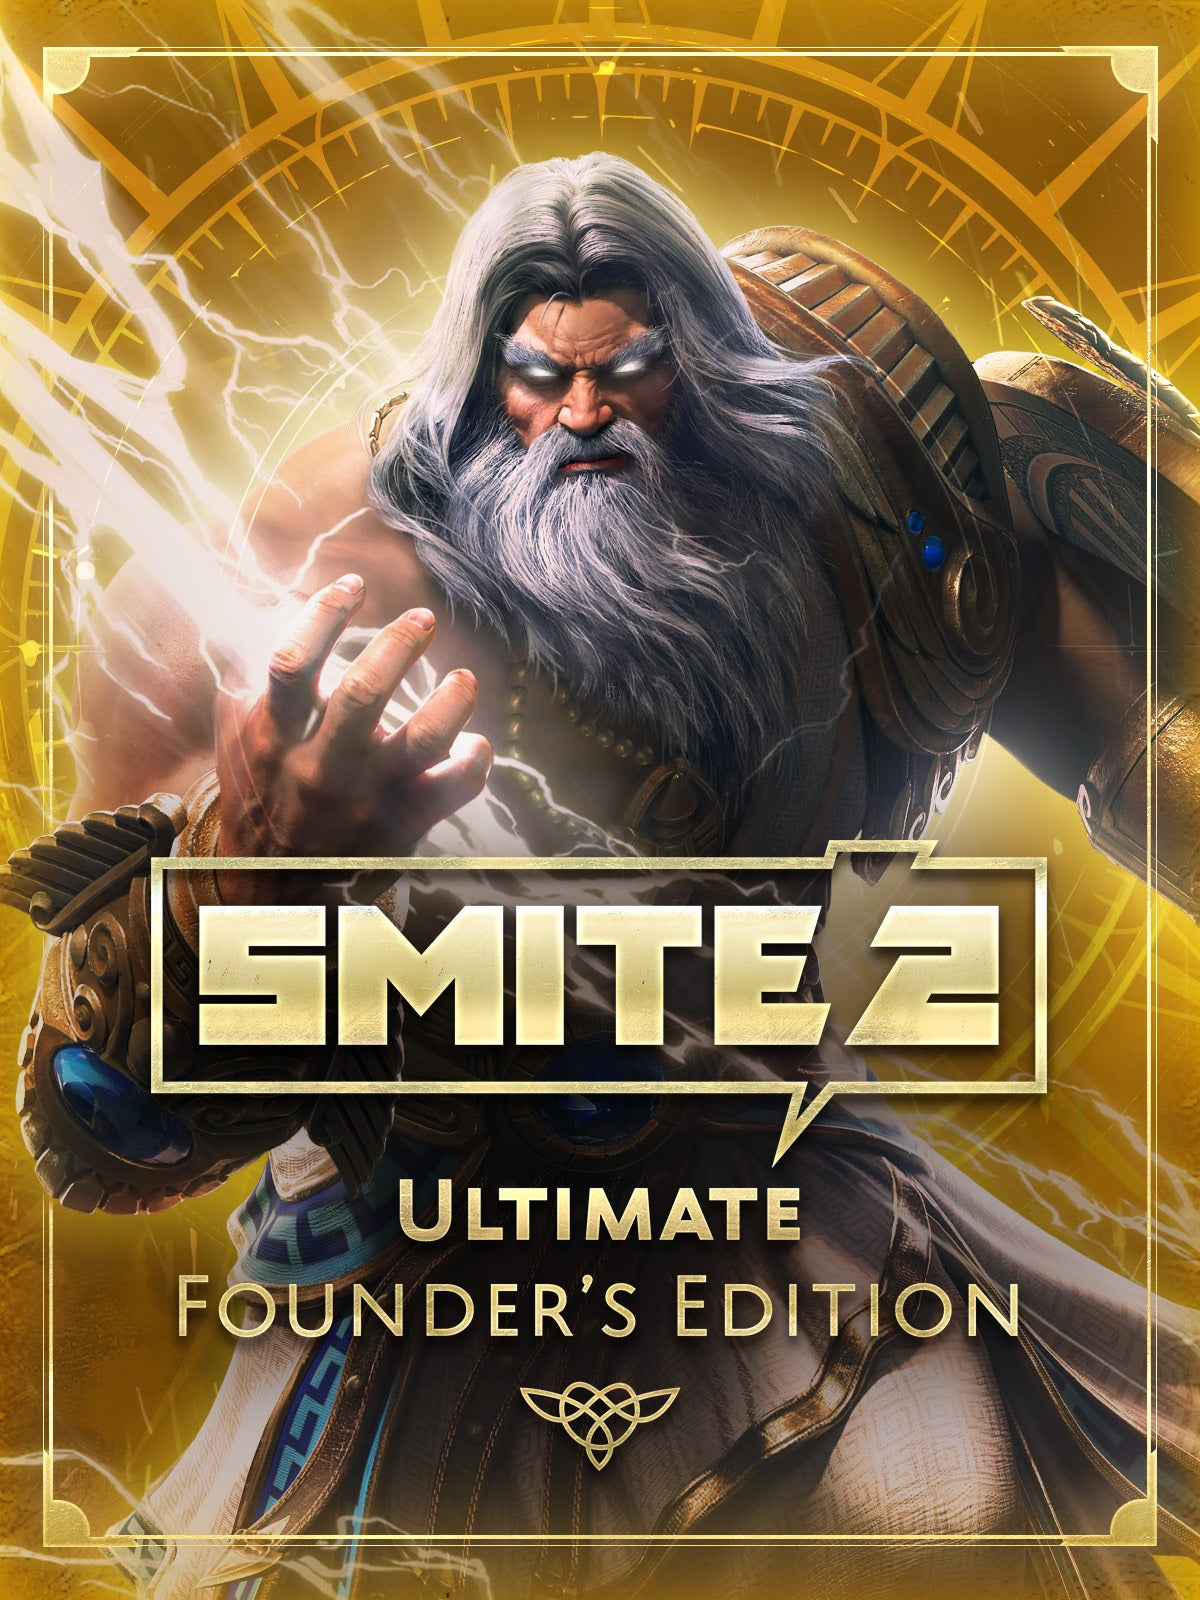 SMITE 2 (Ultimate Founder's Edition) - Xbox